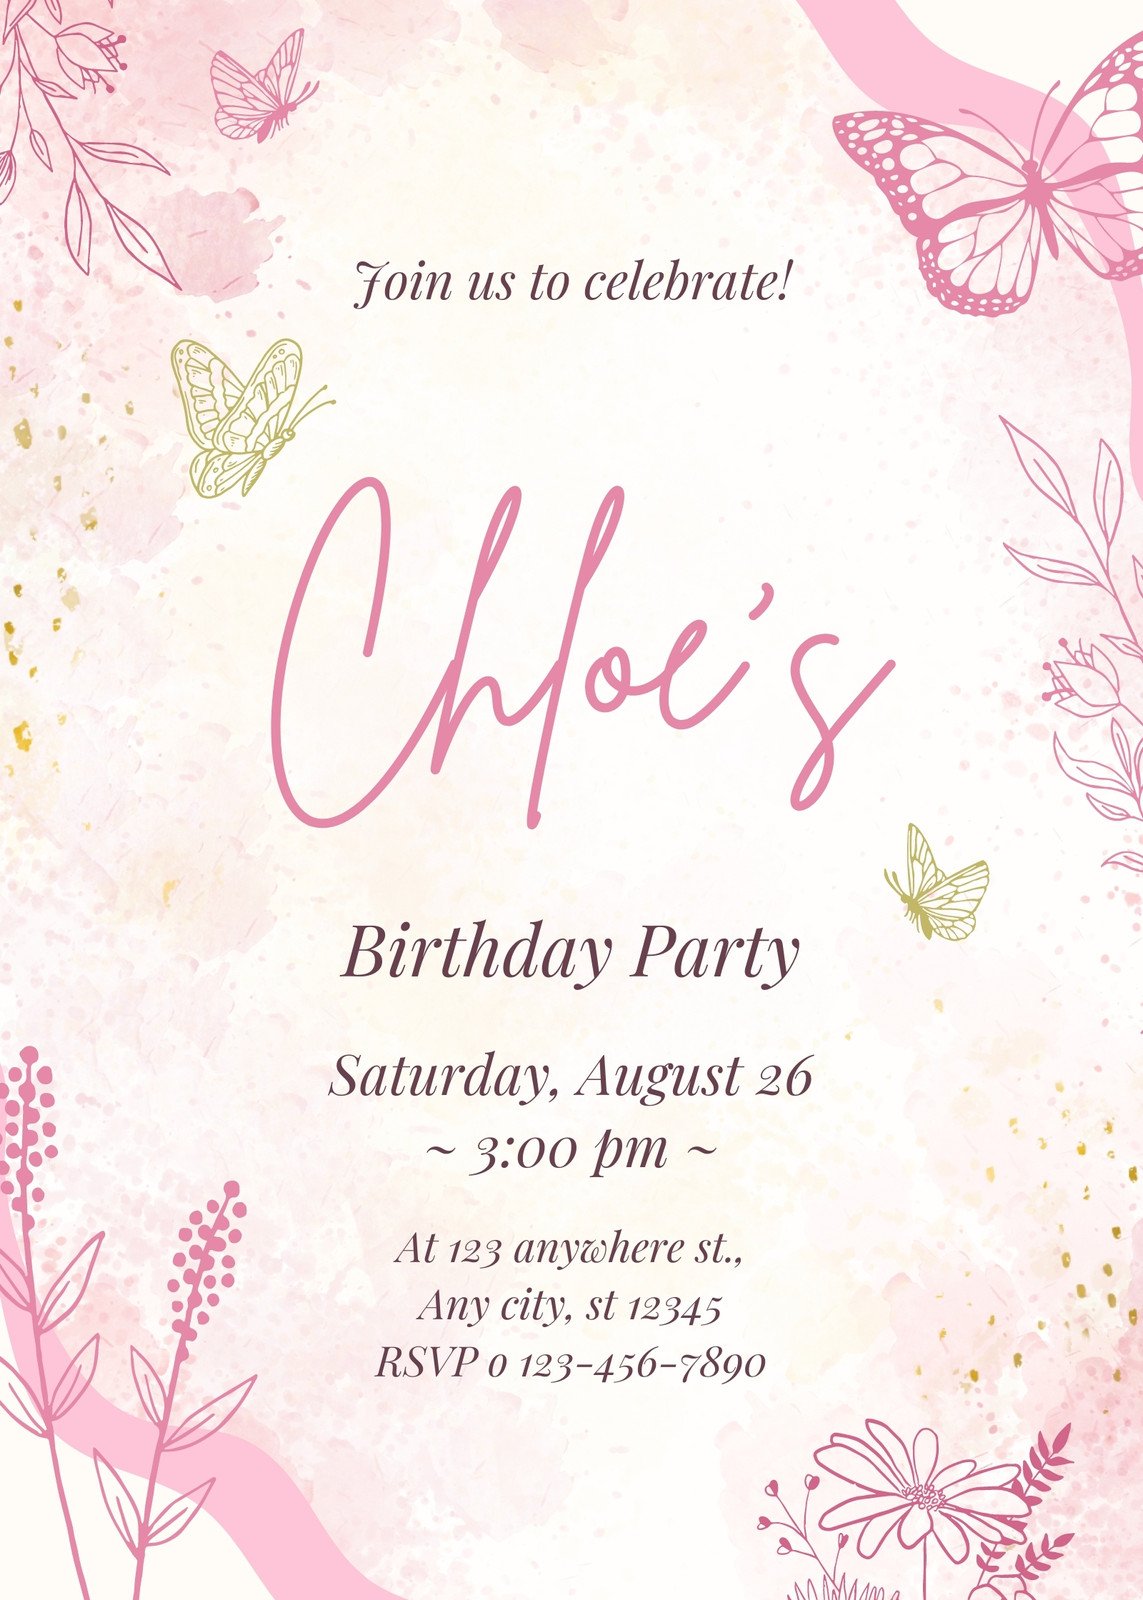 Free to edit and print butterfly invitation templates